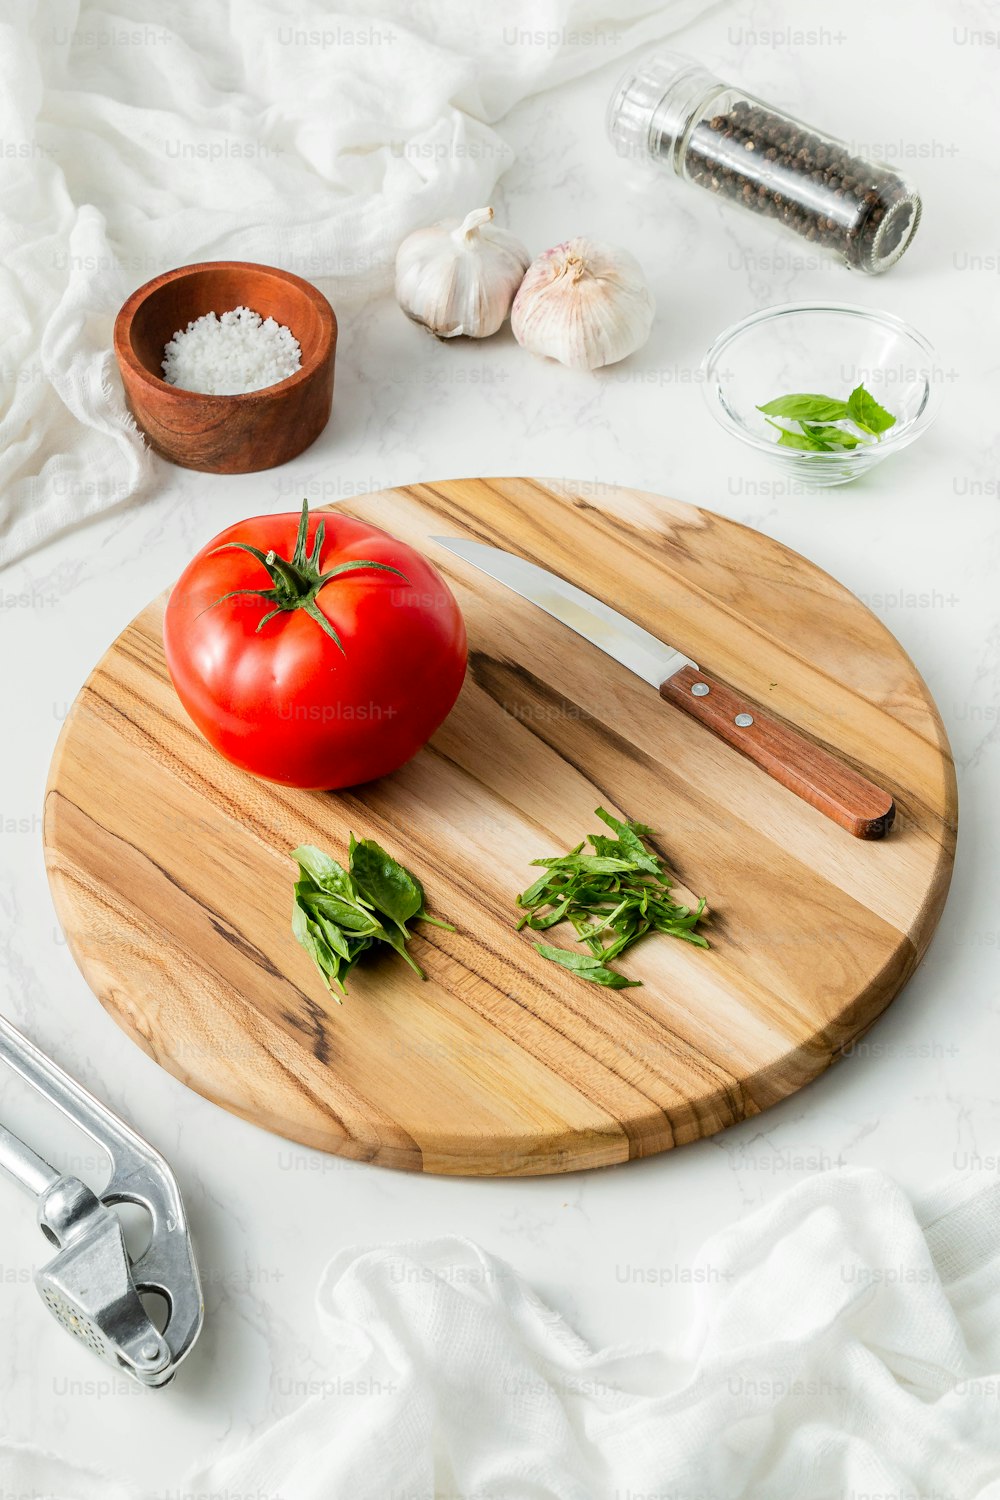 a wooden cutting board with a tomato on it